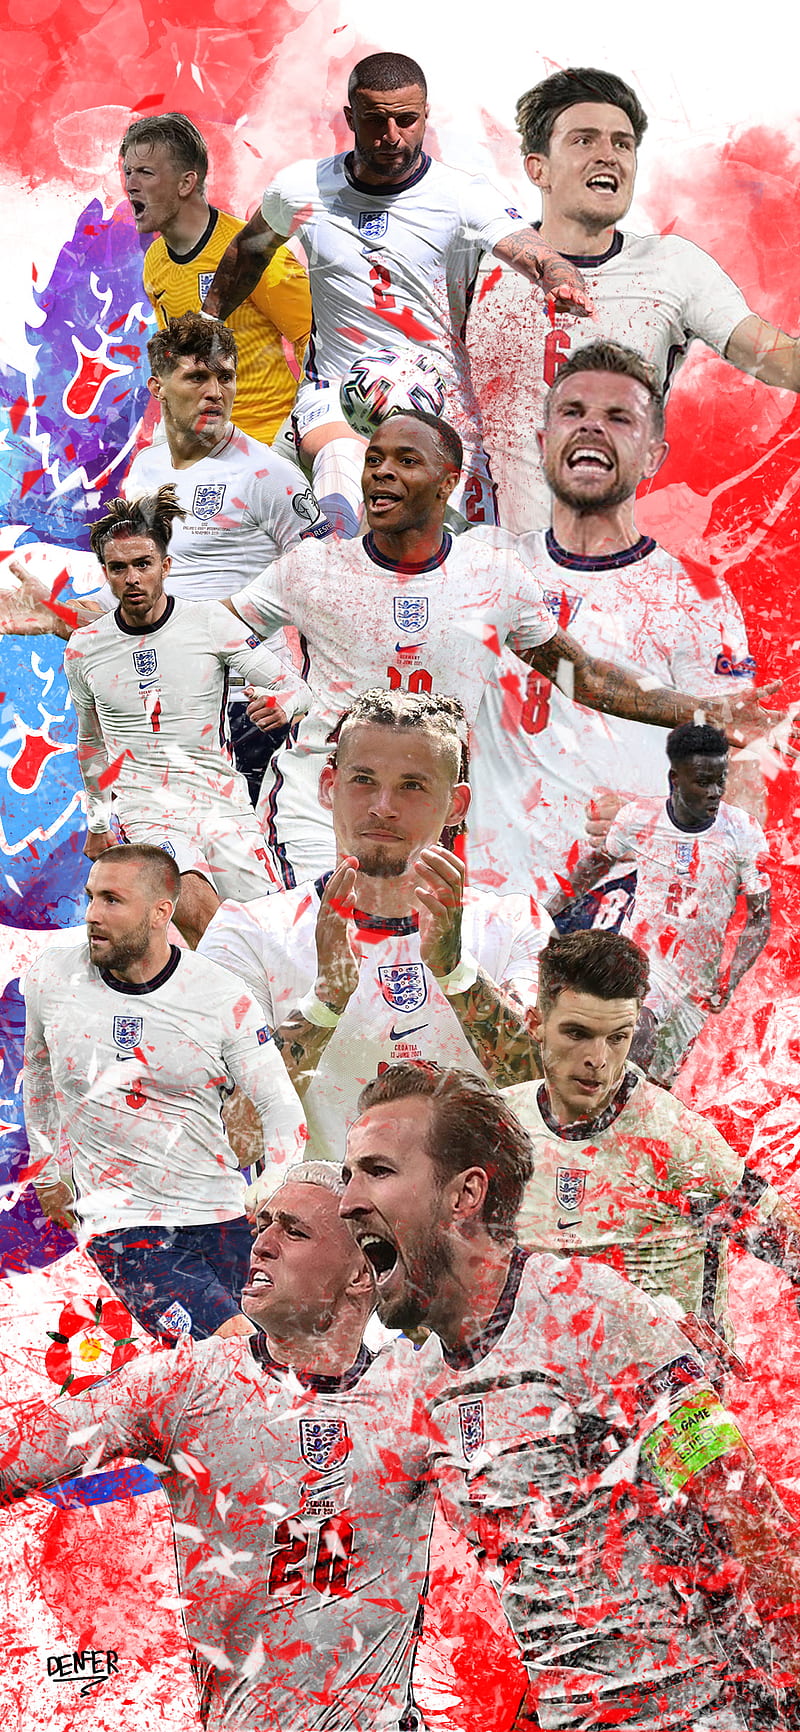 england, phillips, footballs coming home, henderson, sterling, pickford, rice, walker, three lions, saka, it's coming home, foden, maguire, 3 lions, stones, euro 2020, grealish, its coming home, shaw, kane, HD phone wallpaper